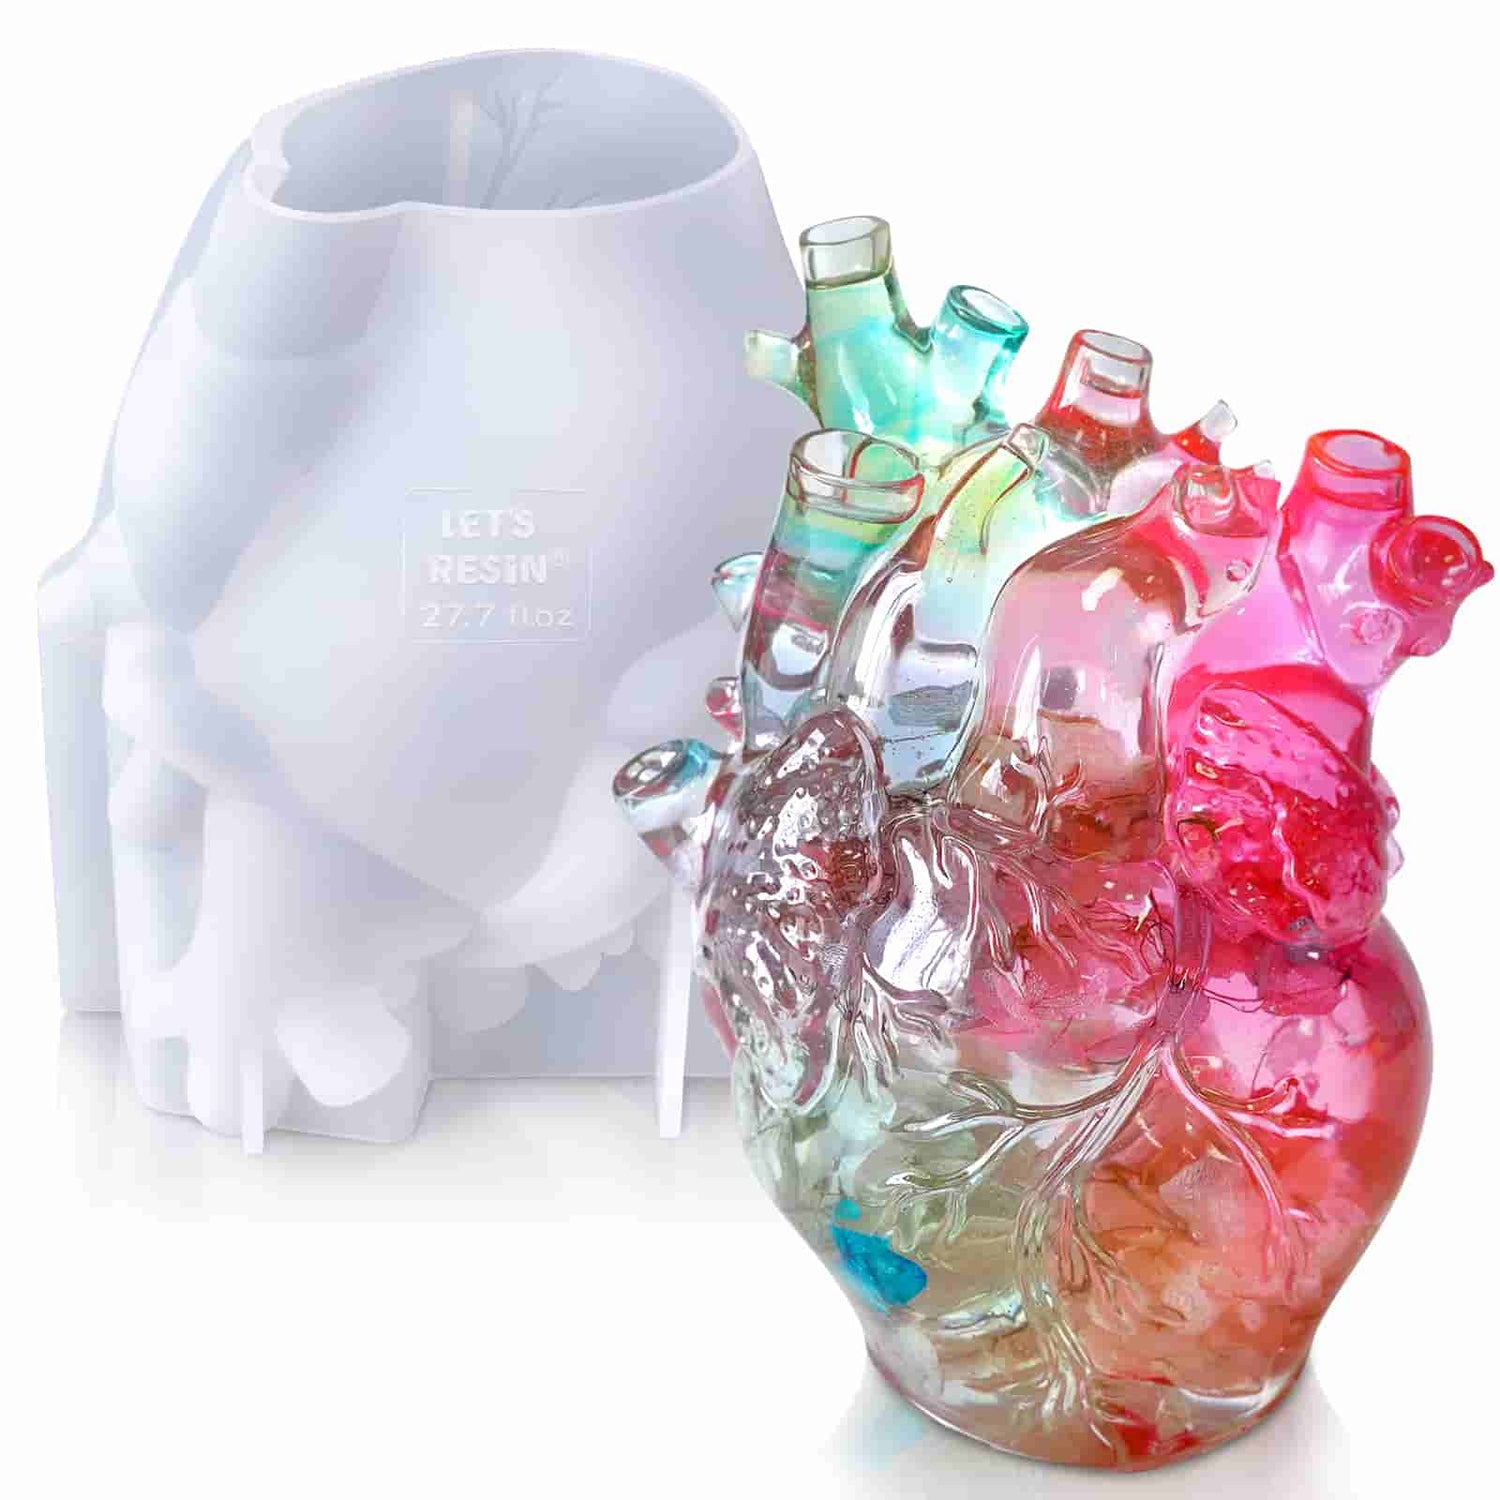 LET'S RESIN Heart Resin Molds, Anatomical Heart Resin Molds Silicone Large  with Thoughtful Details, Silicone Molds for Epoxy Resin, DIY Art Craft